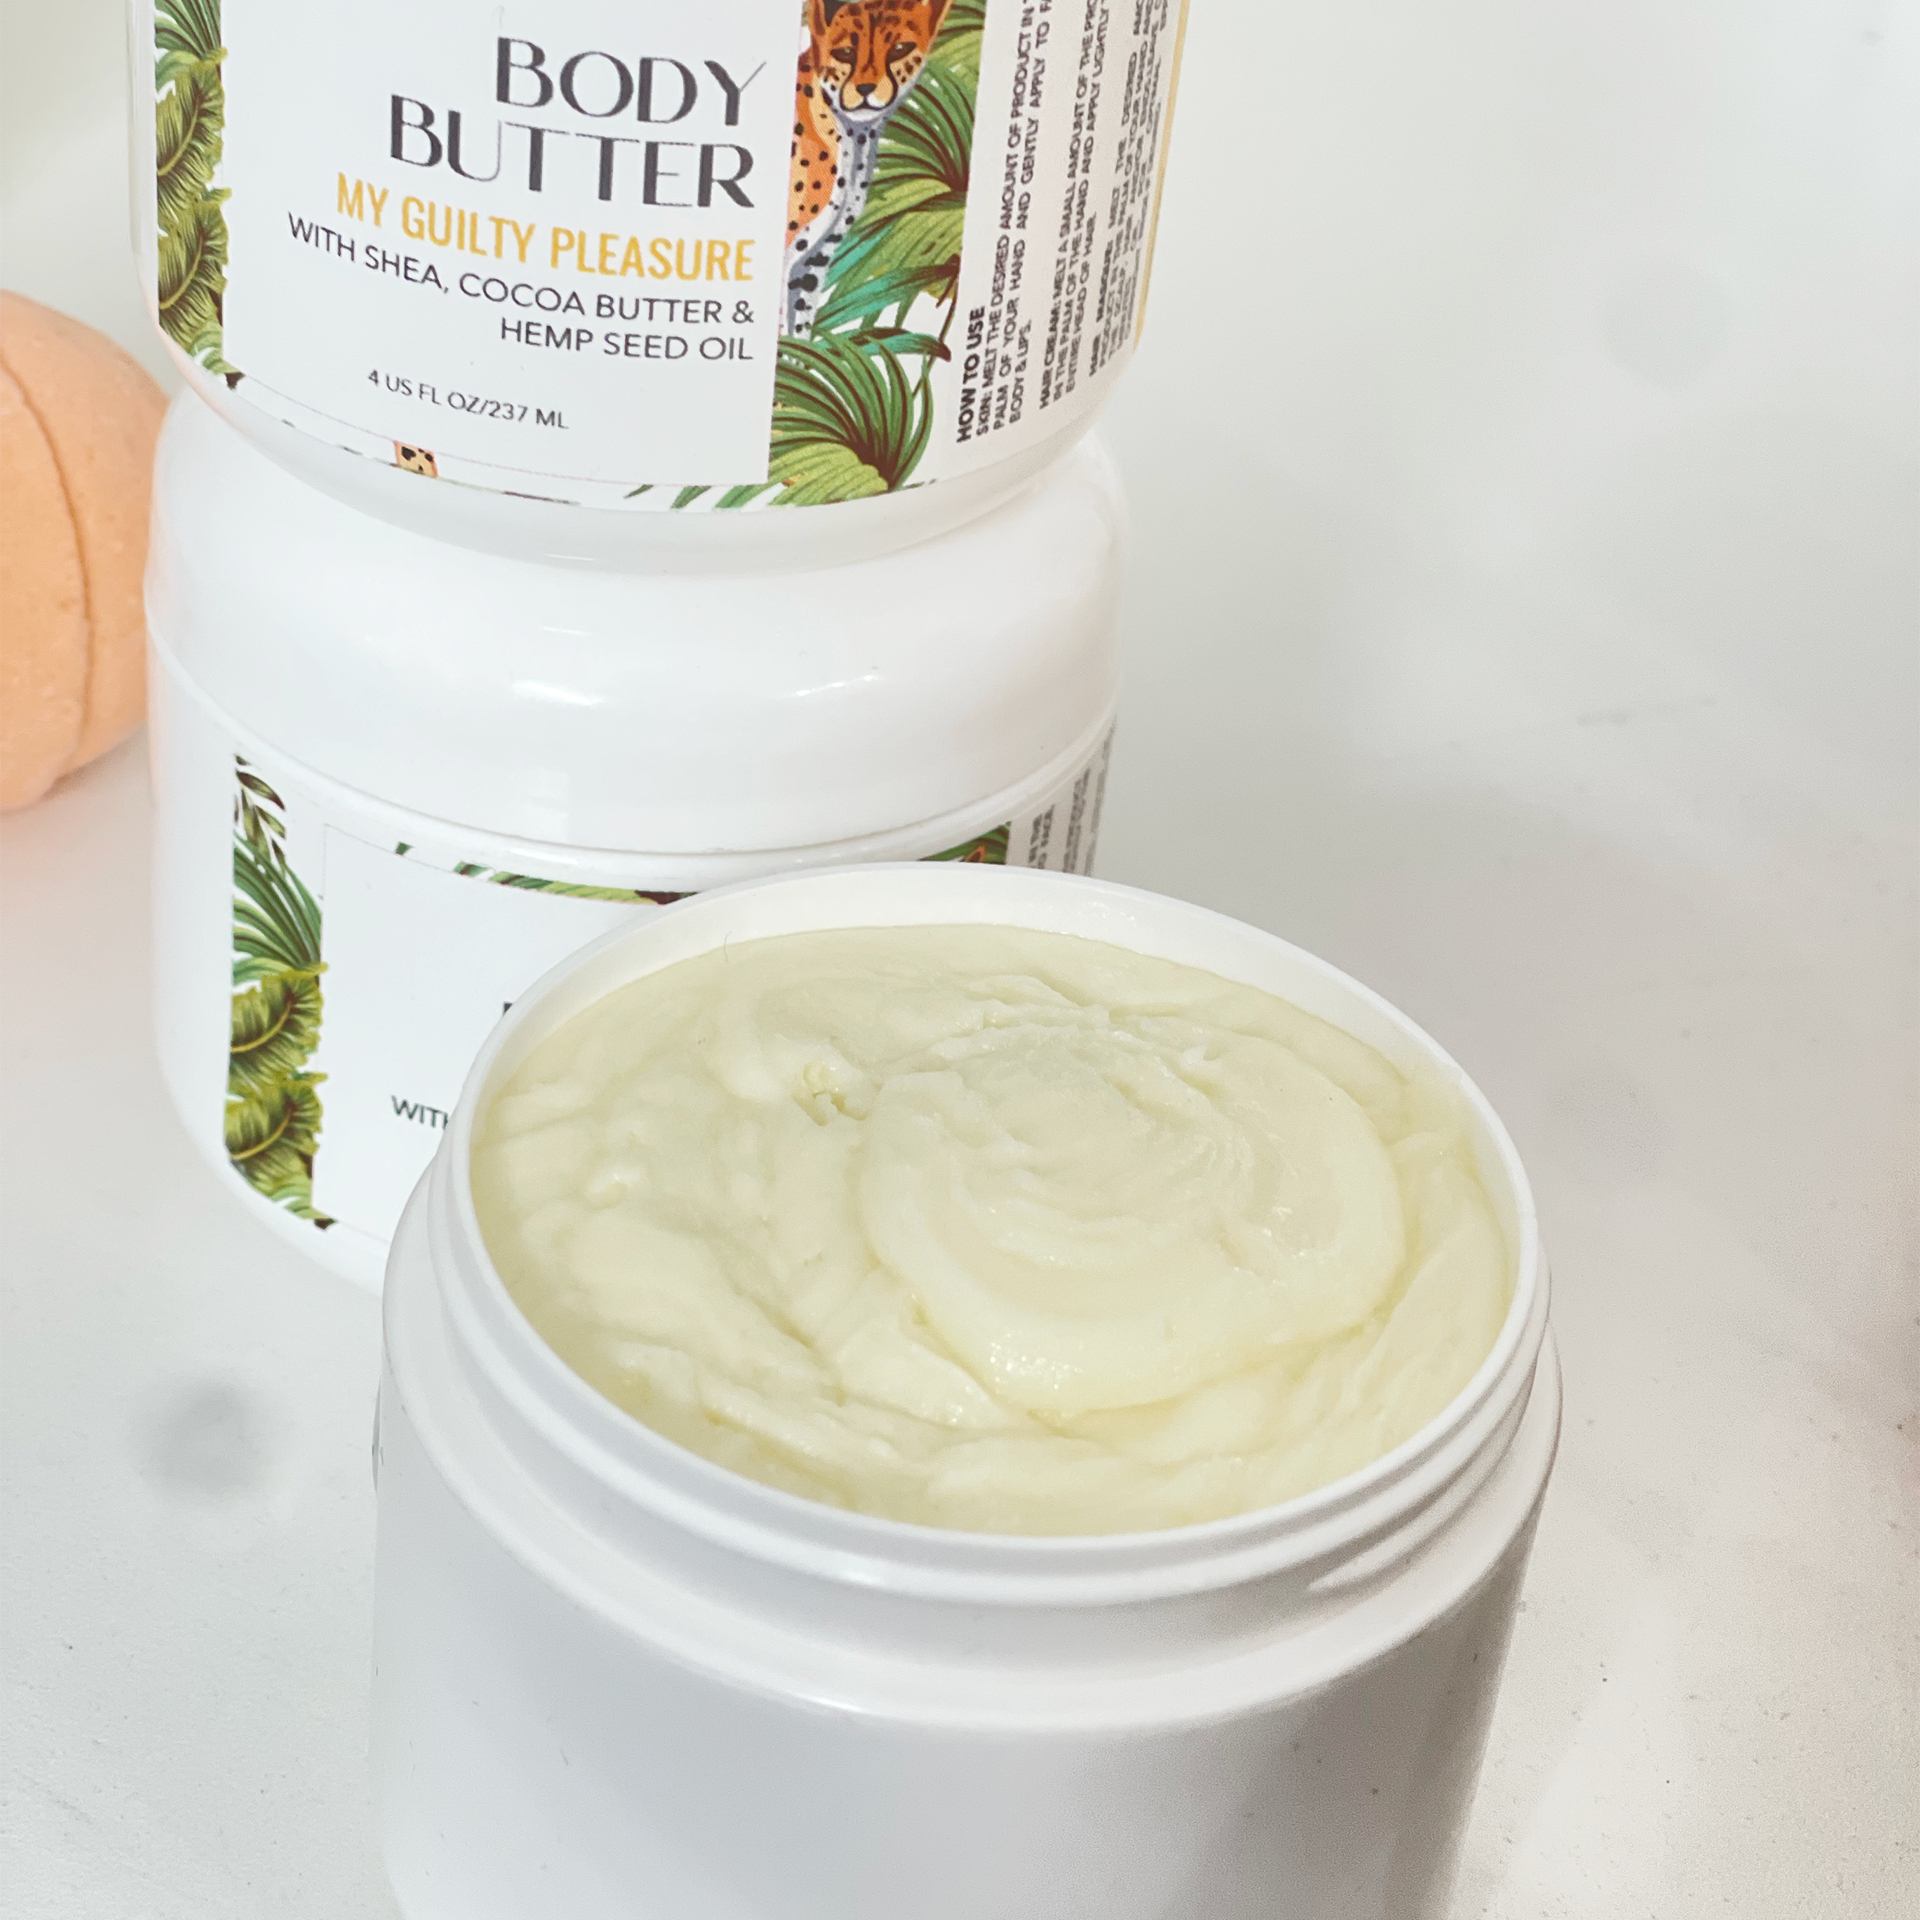 Whipped Body Butter - with Hemp Seed Oil